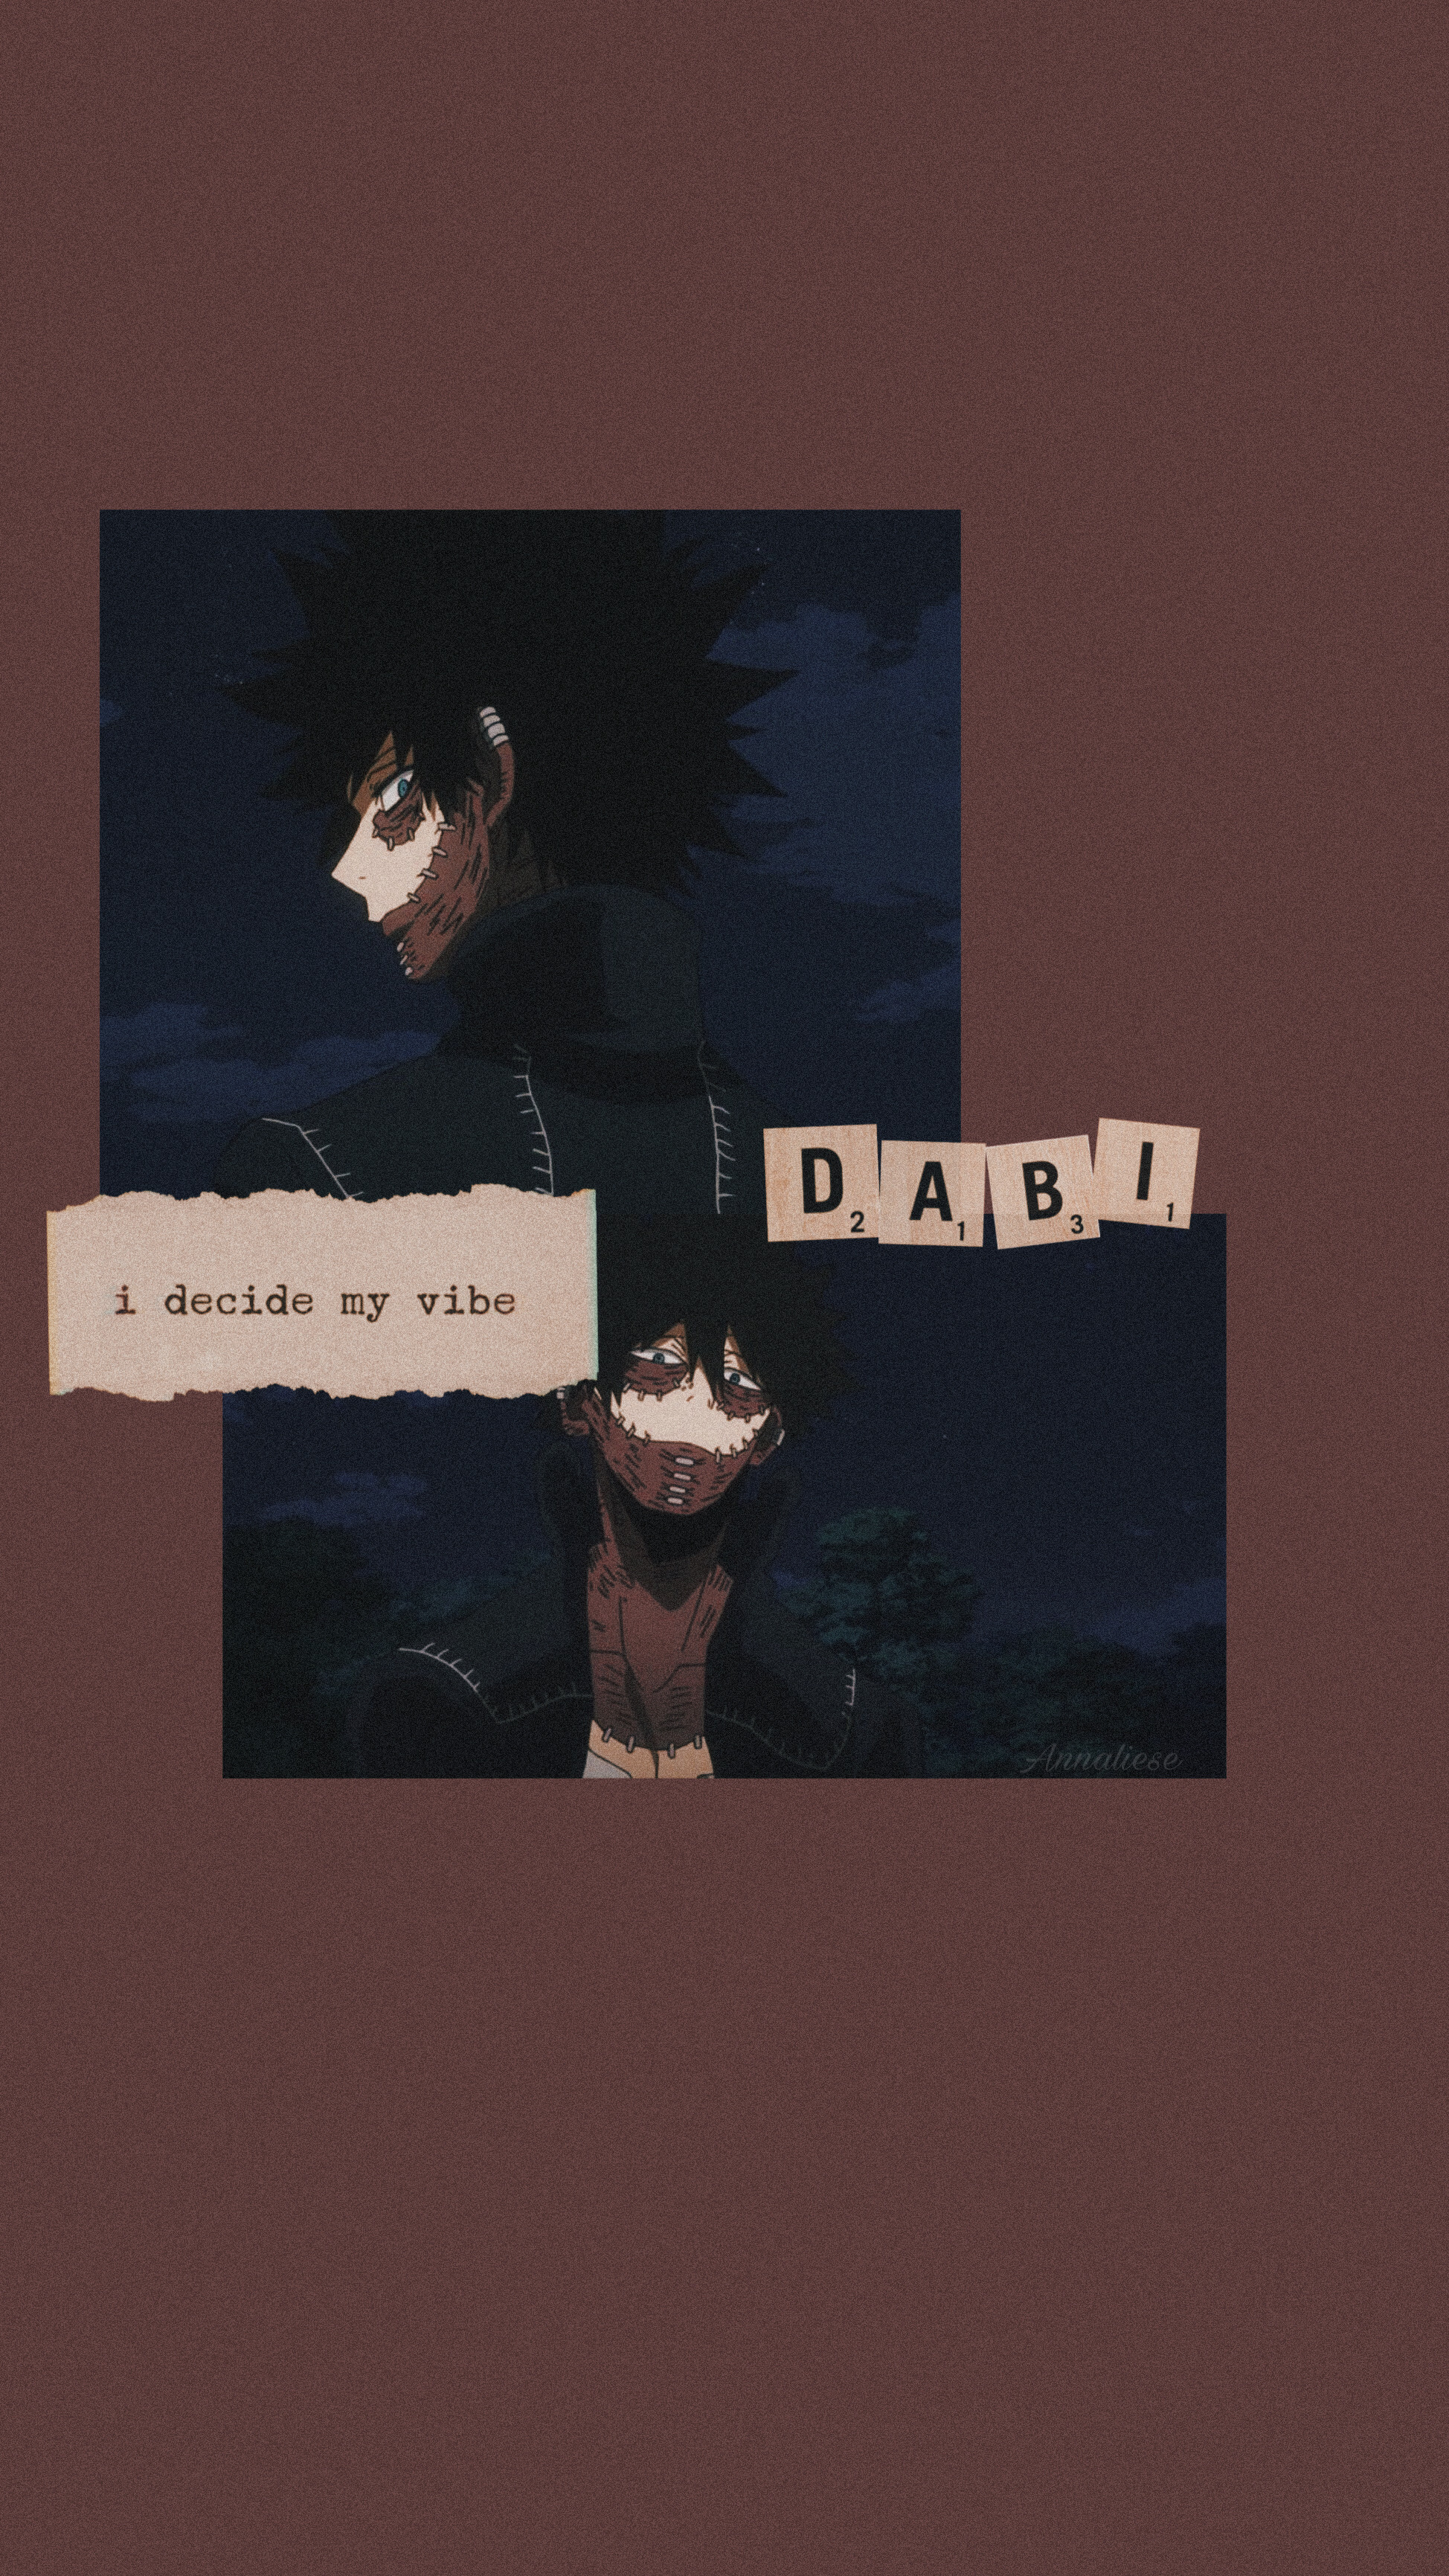 Dabi wallpaper by XxBlearxX  Download on ZEDGE  e78d